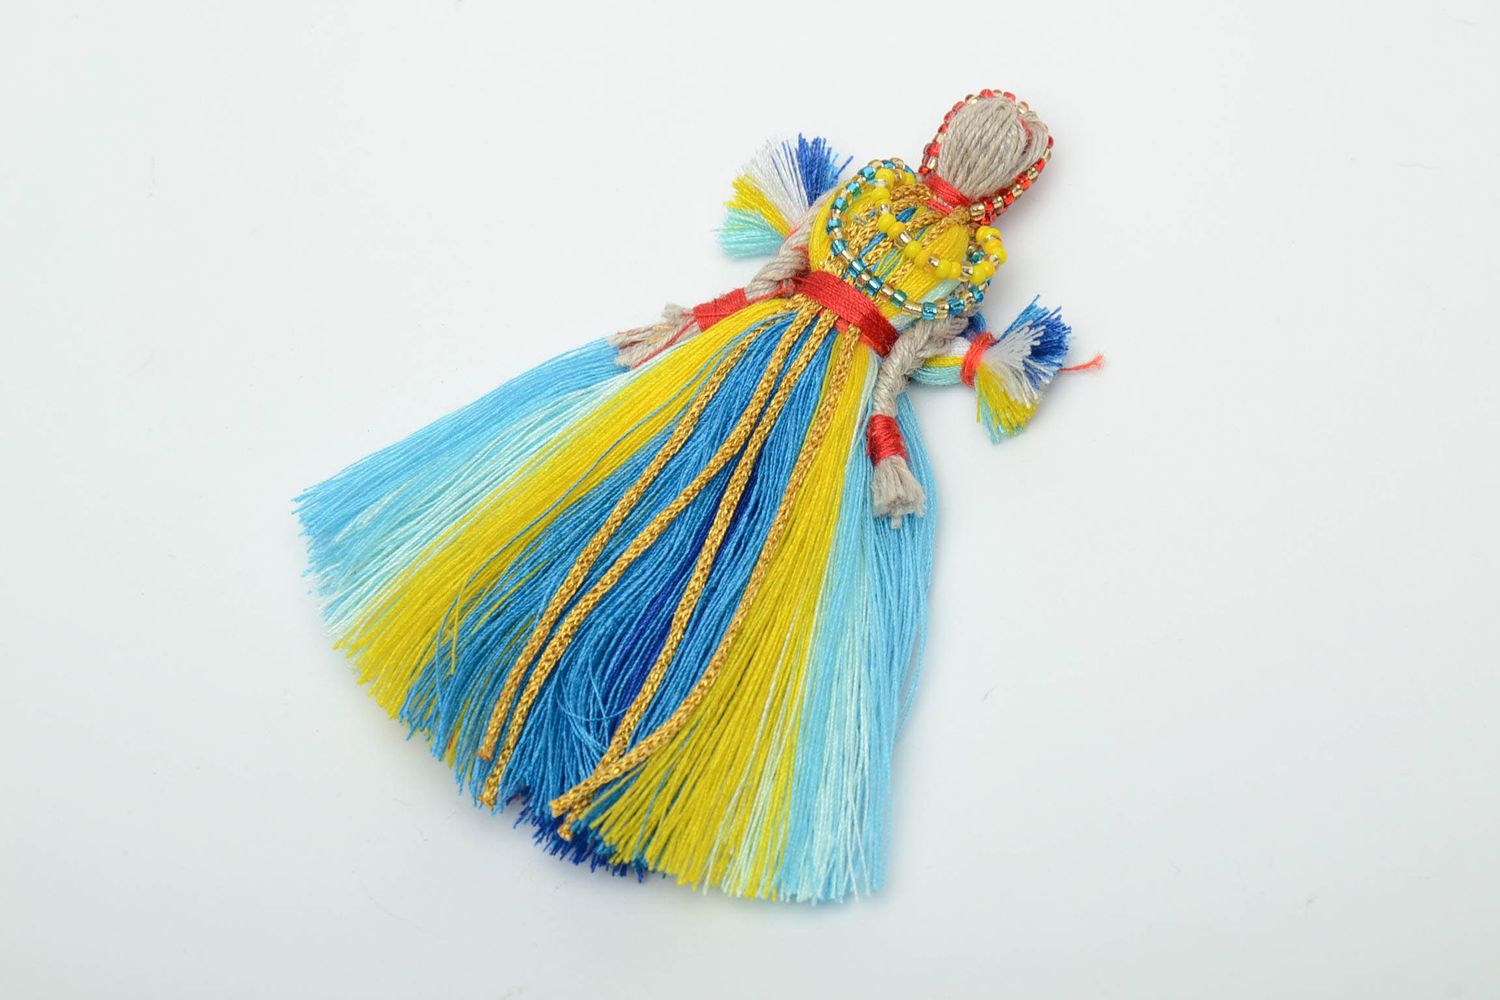 Textile fridge magnet in the shape of doll photo 2